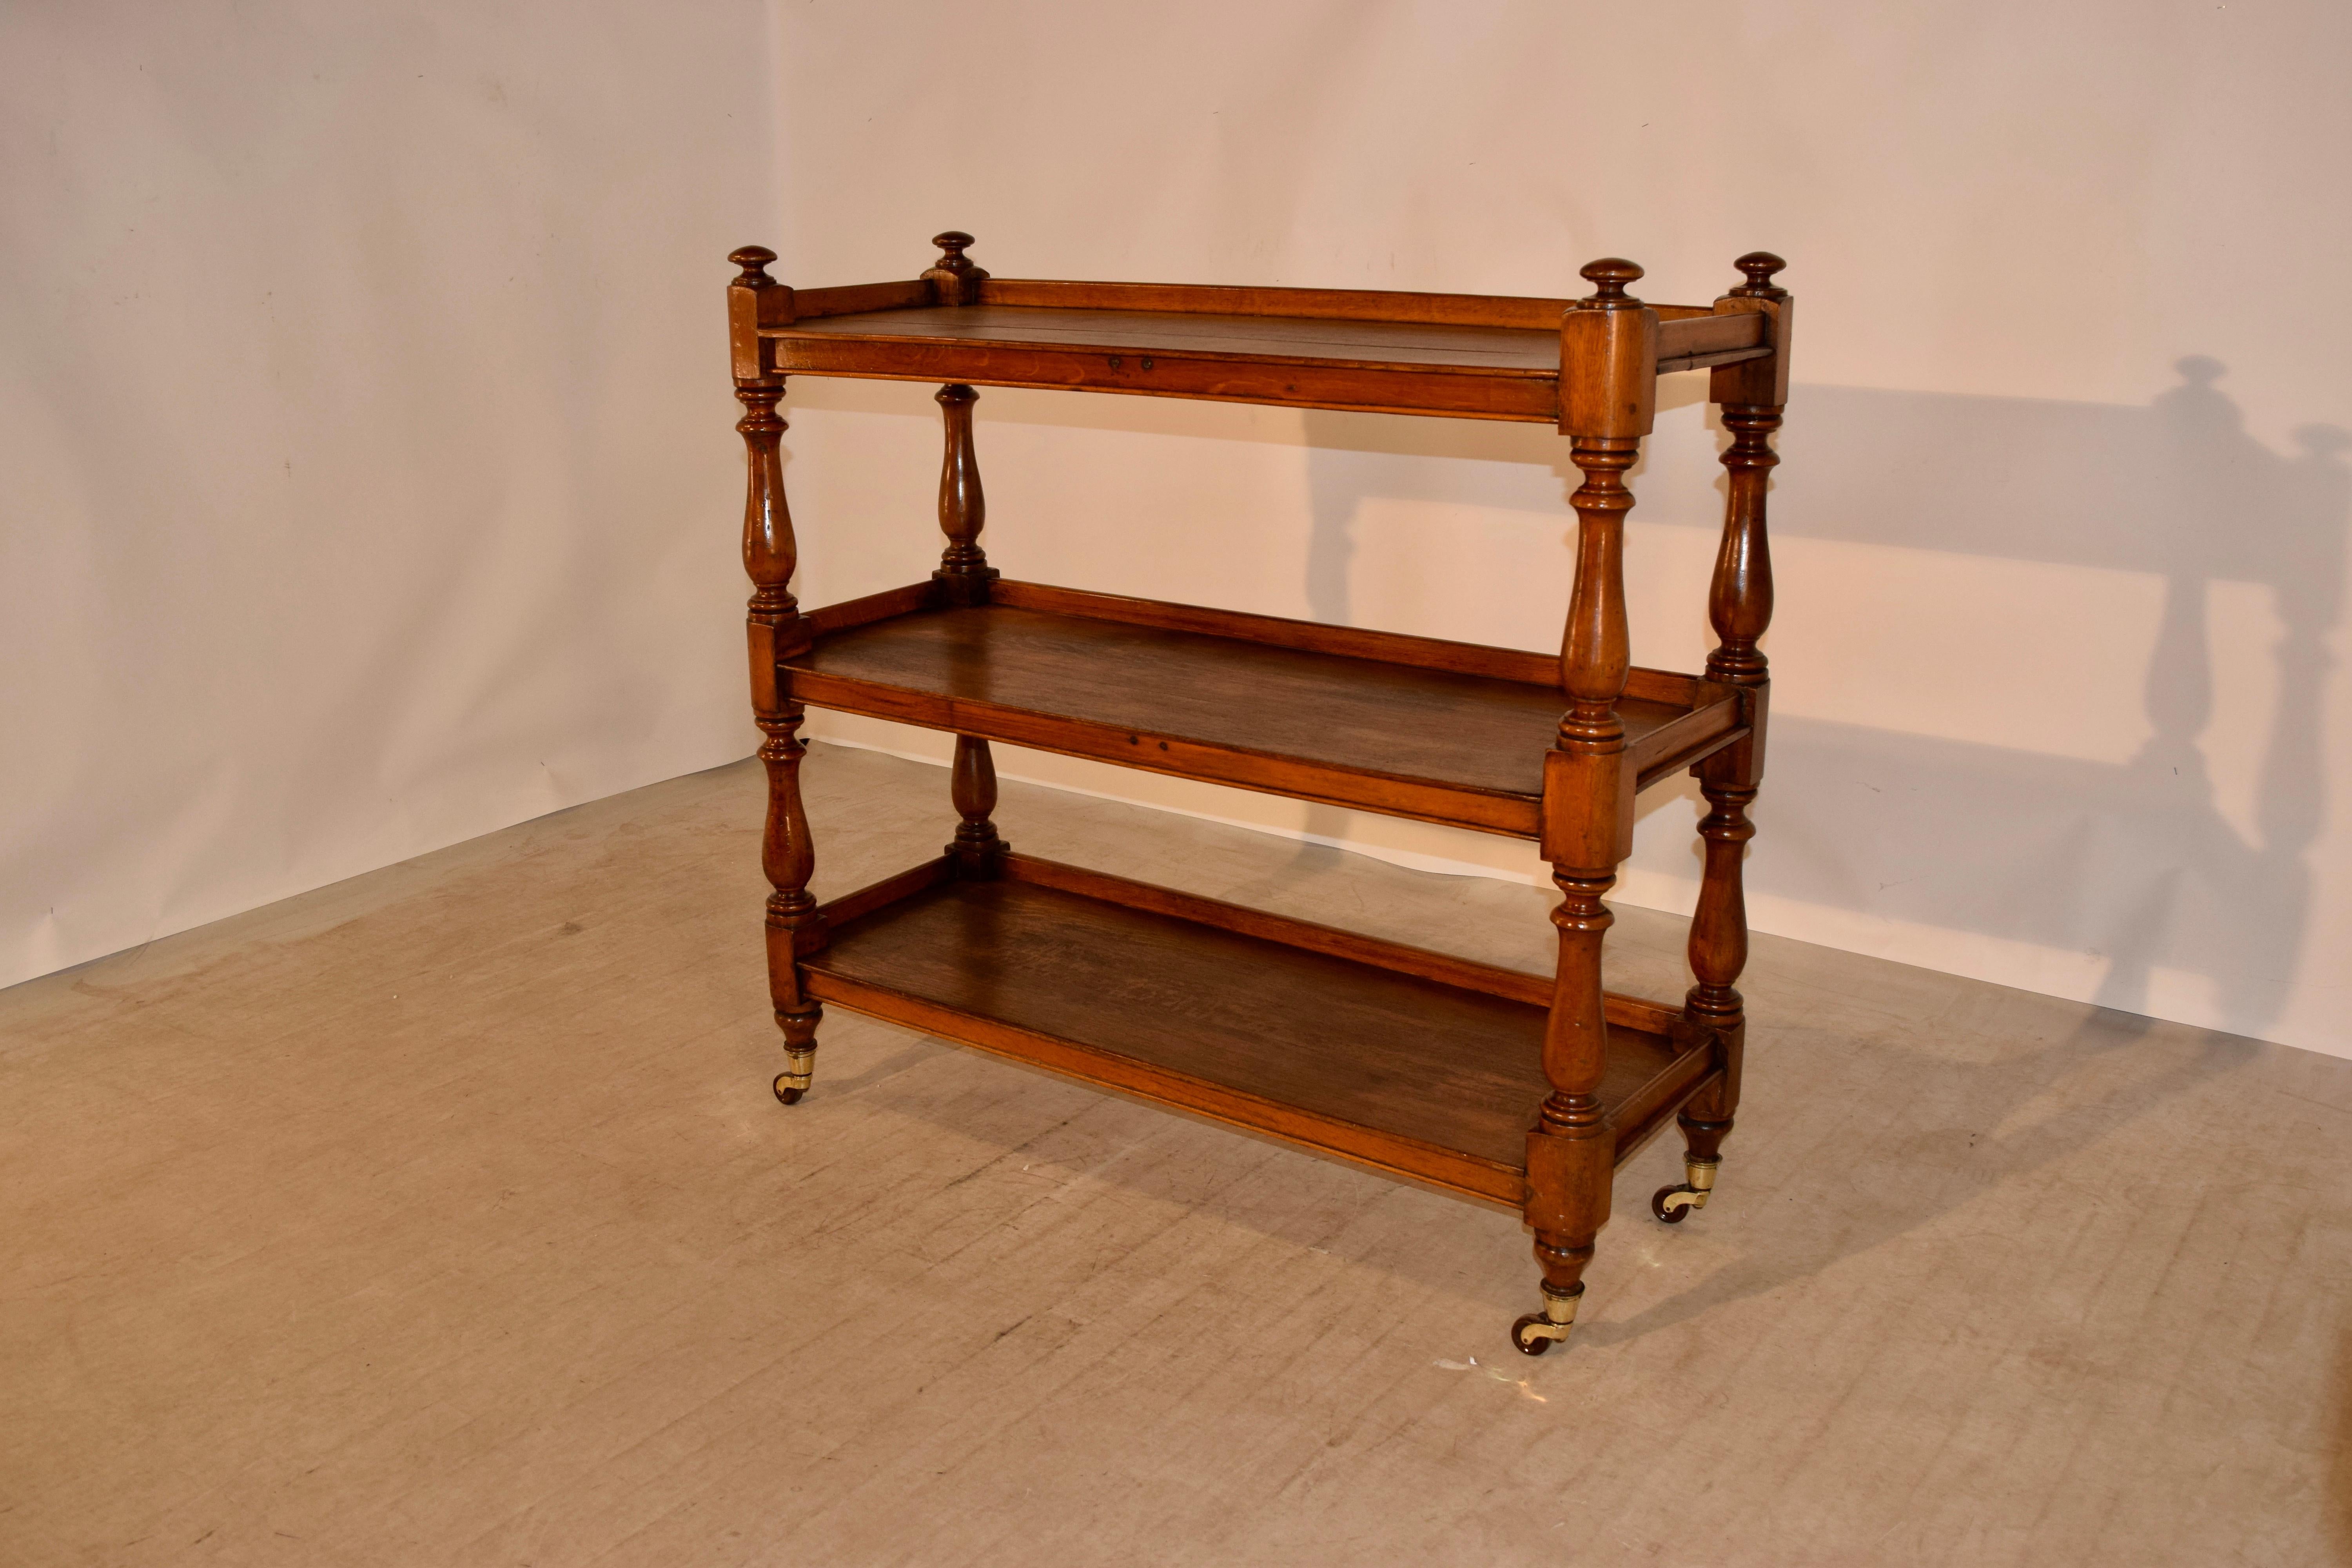 19th century oak dumbwaiter from England with three shelves, all with galleries and hand turned shelf supports. Supported on original brass casters. Staining on shelves due to age and use.